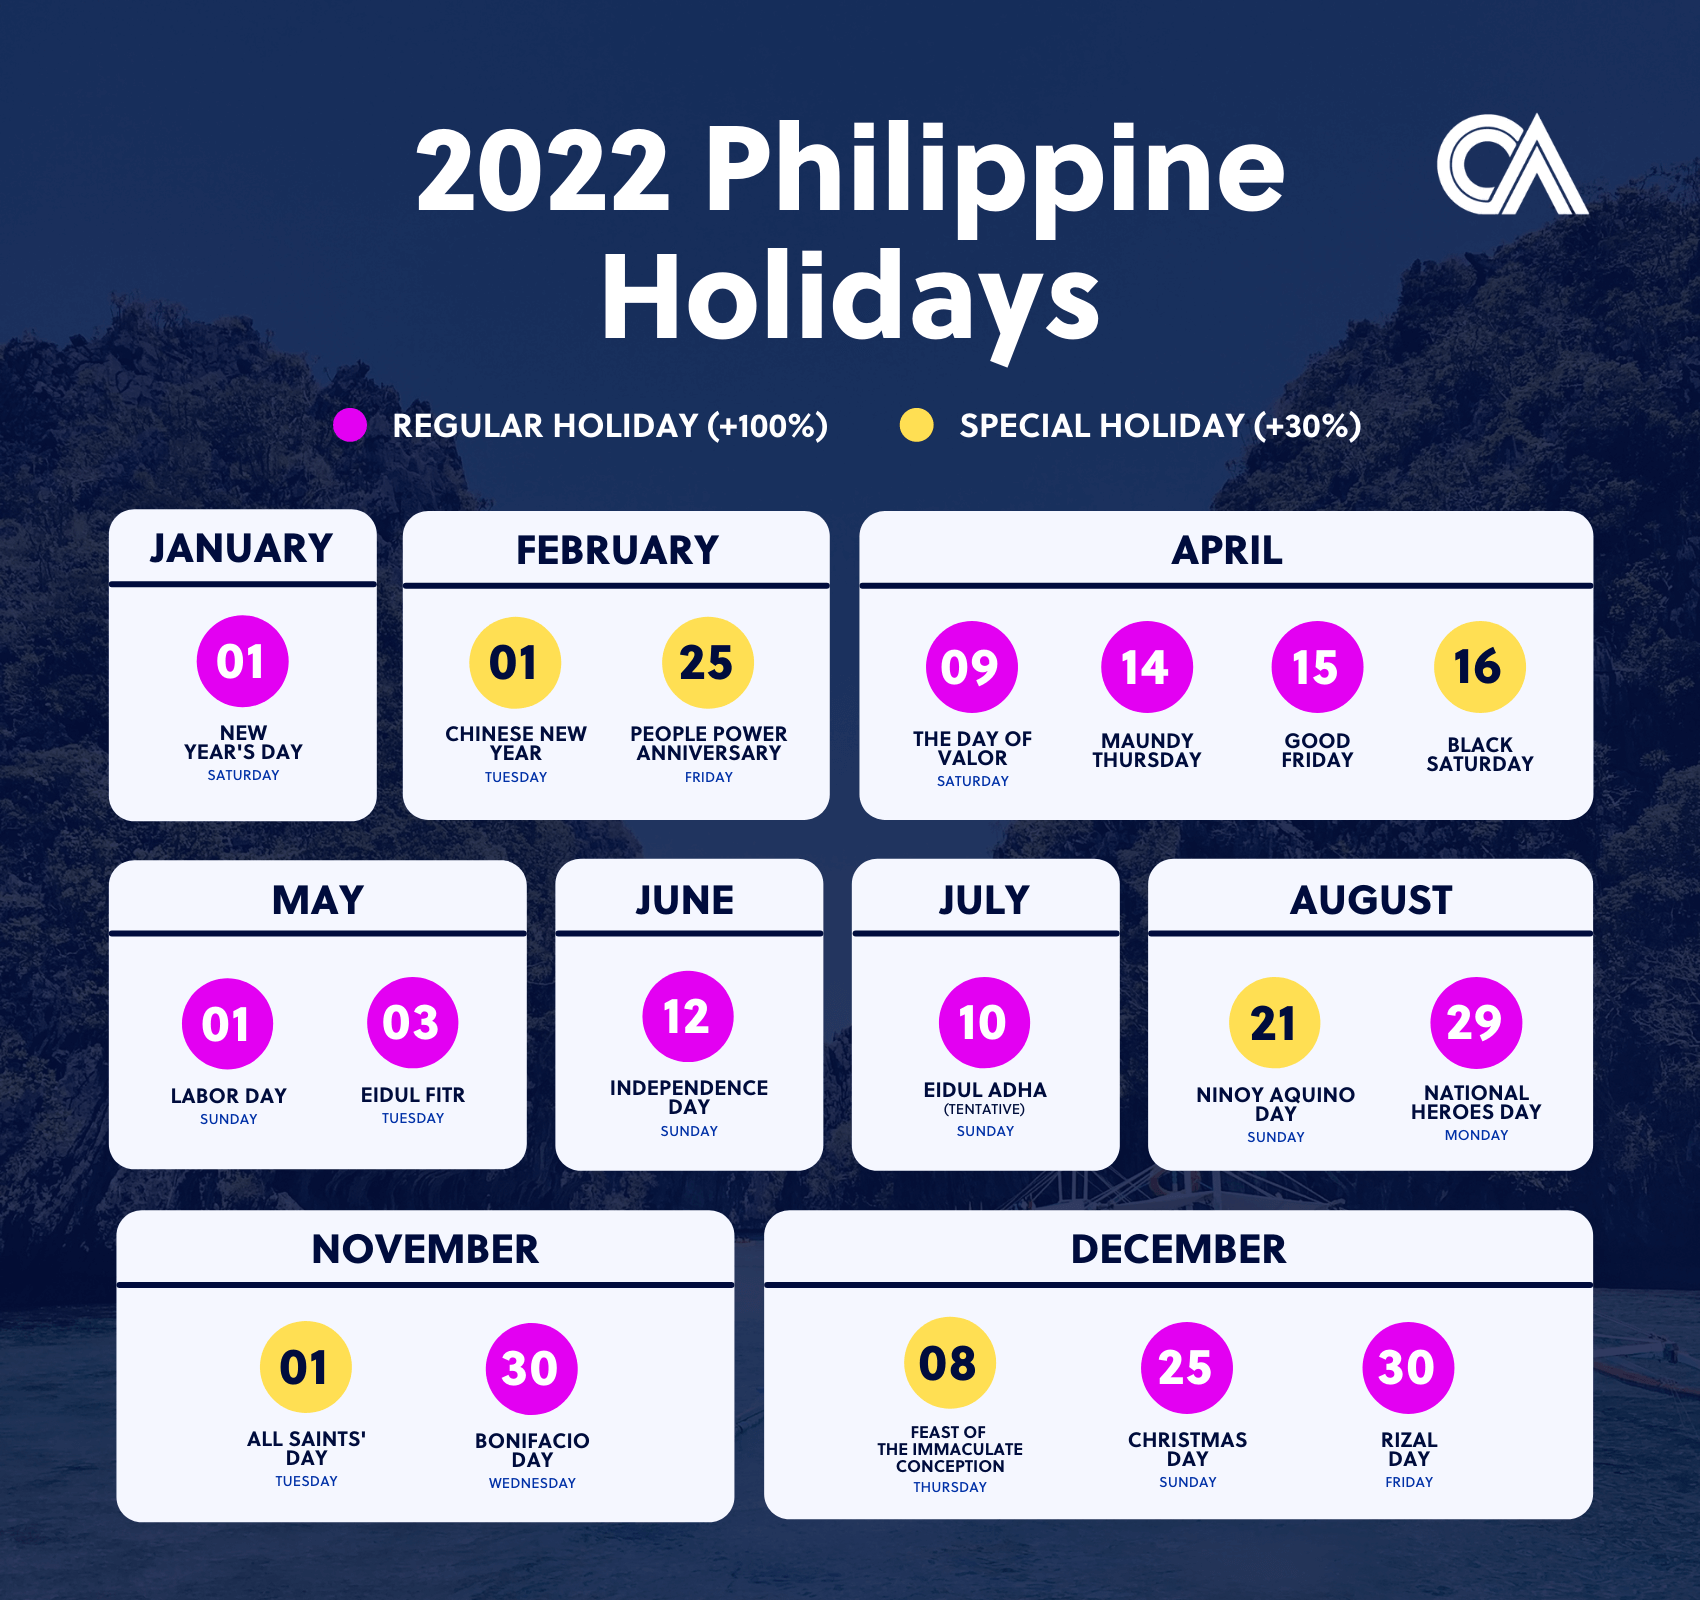 Top 19 mejores march 24 2022 holidays philippines en 2022 (2023)